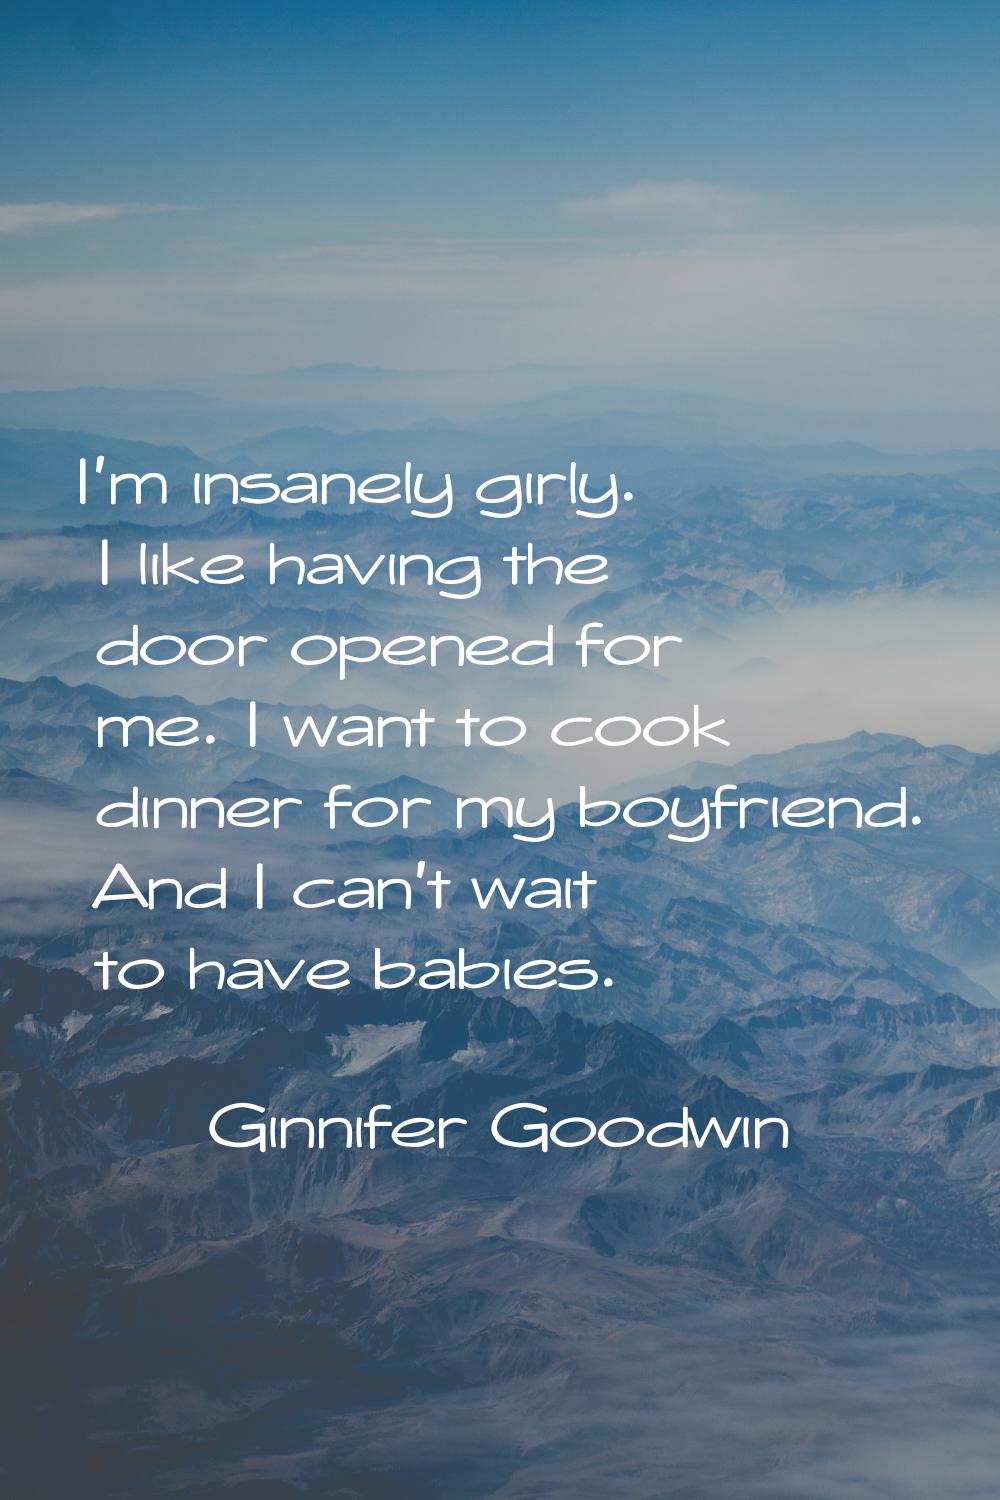 I'm insanely girly. I like having the door opened for me. I want to cook dinner for my boyfriend. A